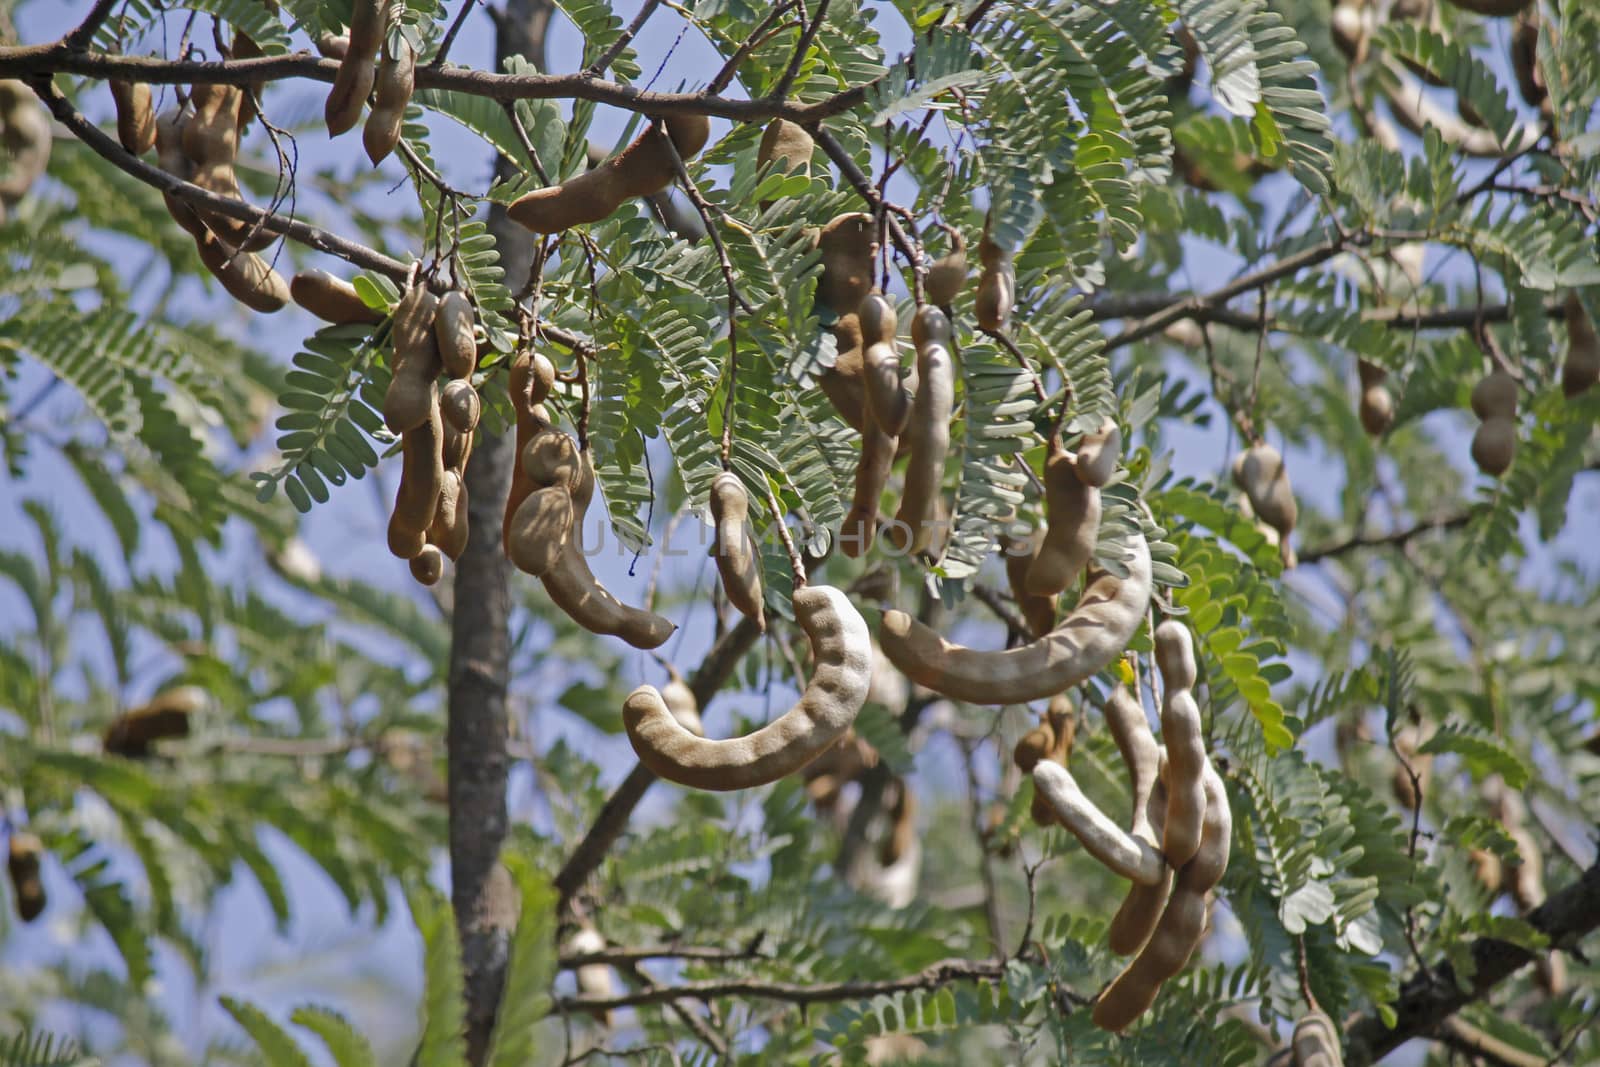 Tamarind, Tamarindus indica. The tamarind tree produces edible, pod-like fruit which are used extensively in cuisines around the world. Other uses include traditional medicine and metal polish. The wood can be used in carpentry. Because of the tamarind's many uses, cultivation has spread around the world in tropical and subtropical zones.